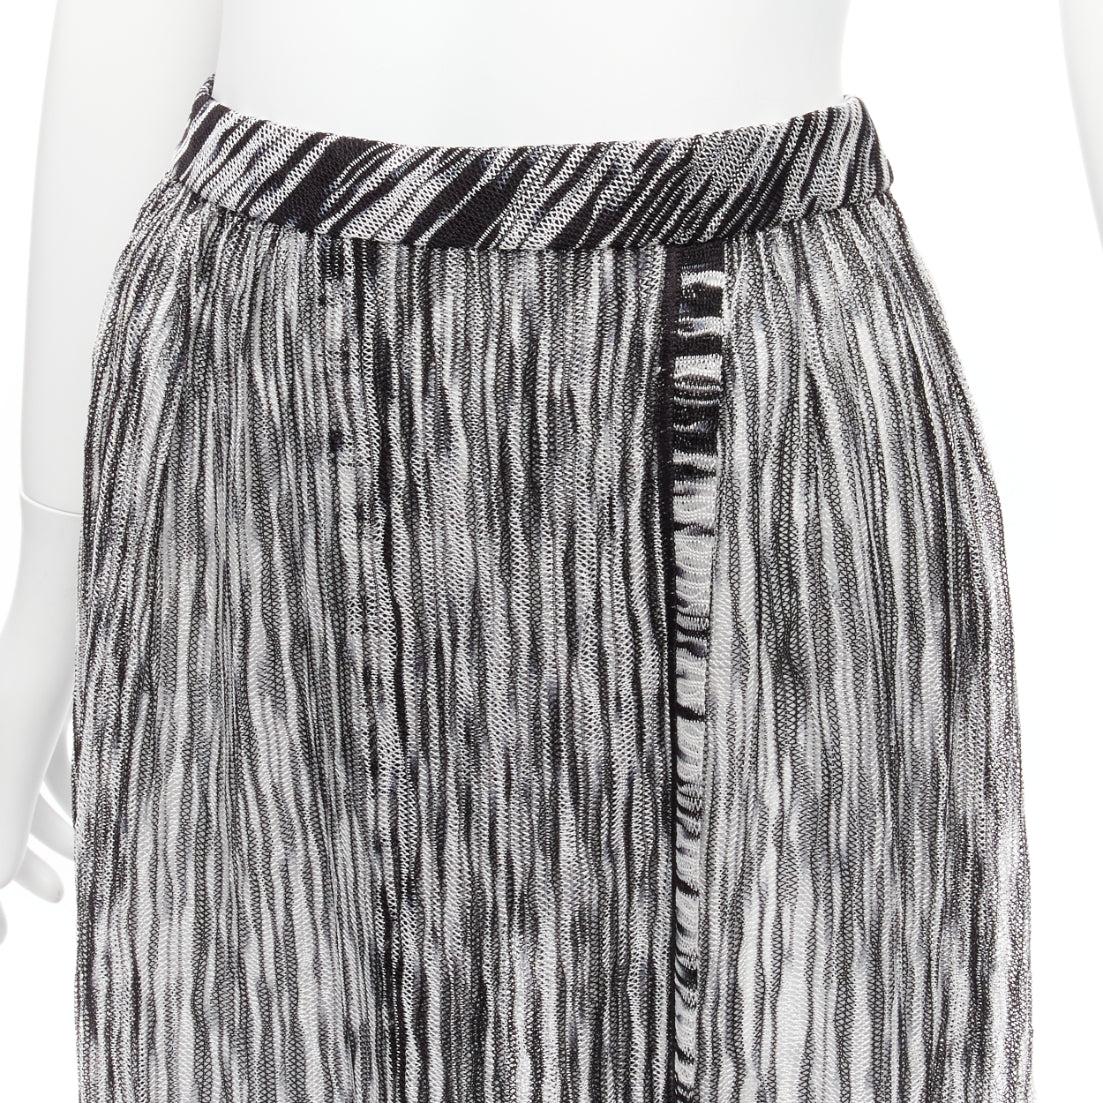 MISSONI Mare black white melange knit elastic wrap sarong skirt IT38 XS
Reference: SNKO/A00319
Brand: Missoni
Material: Rayon
Color: Black, White
Closure: Elasticated
Extra Details: Elasticated waistband.
Made in: Italy

CONDITION:
Condition: Unworn